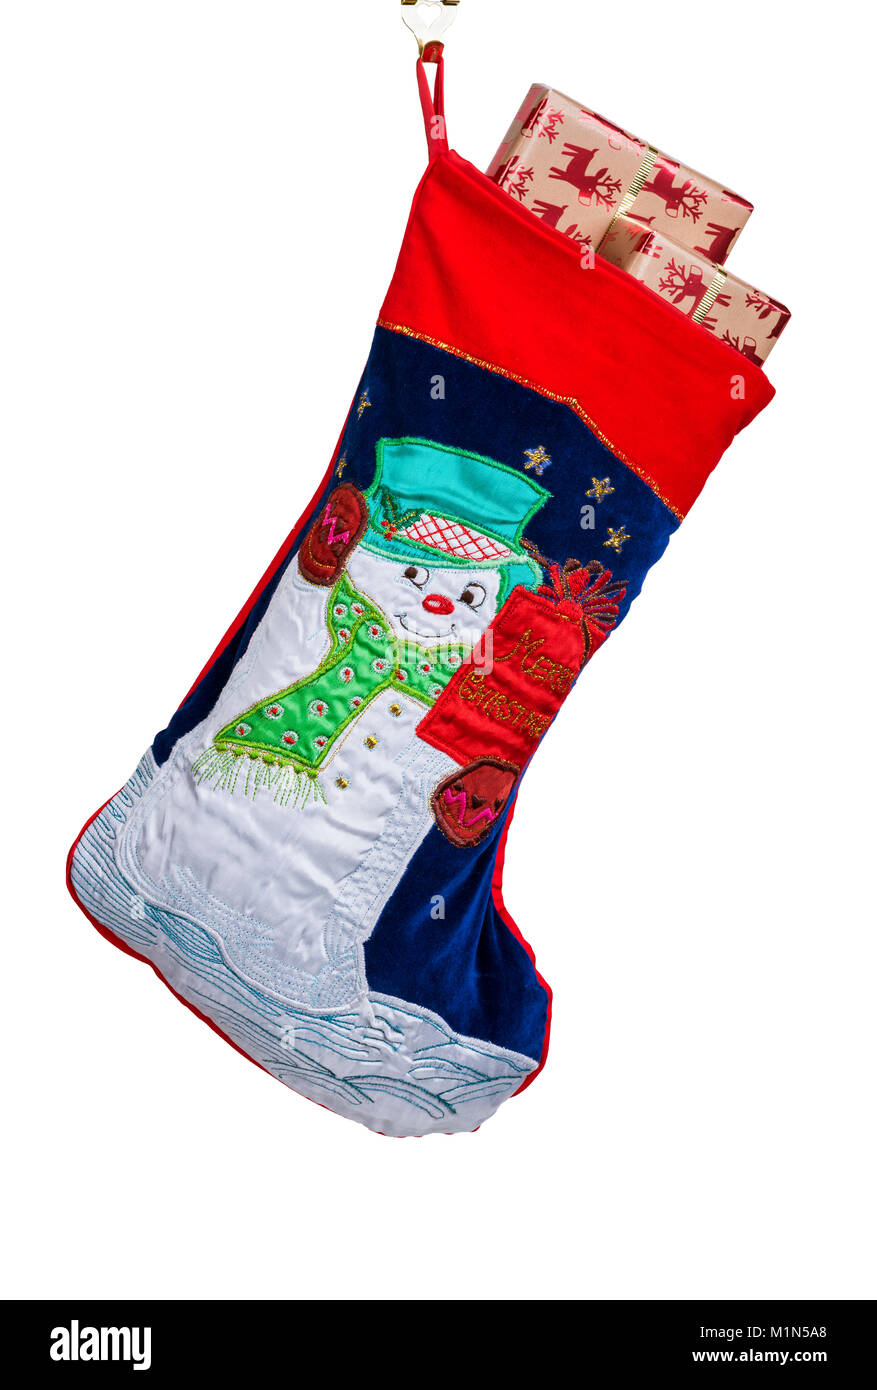 Traditional Christmas or Xmas stocking, filled with gift wrapped presents or gifts. Stock Photo